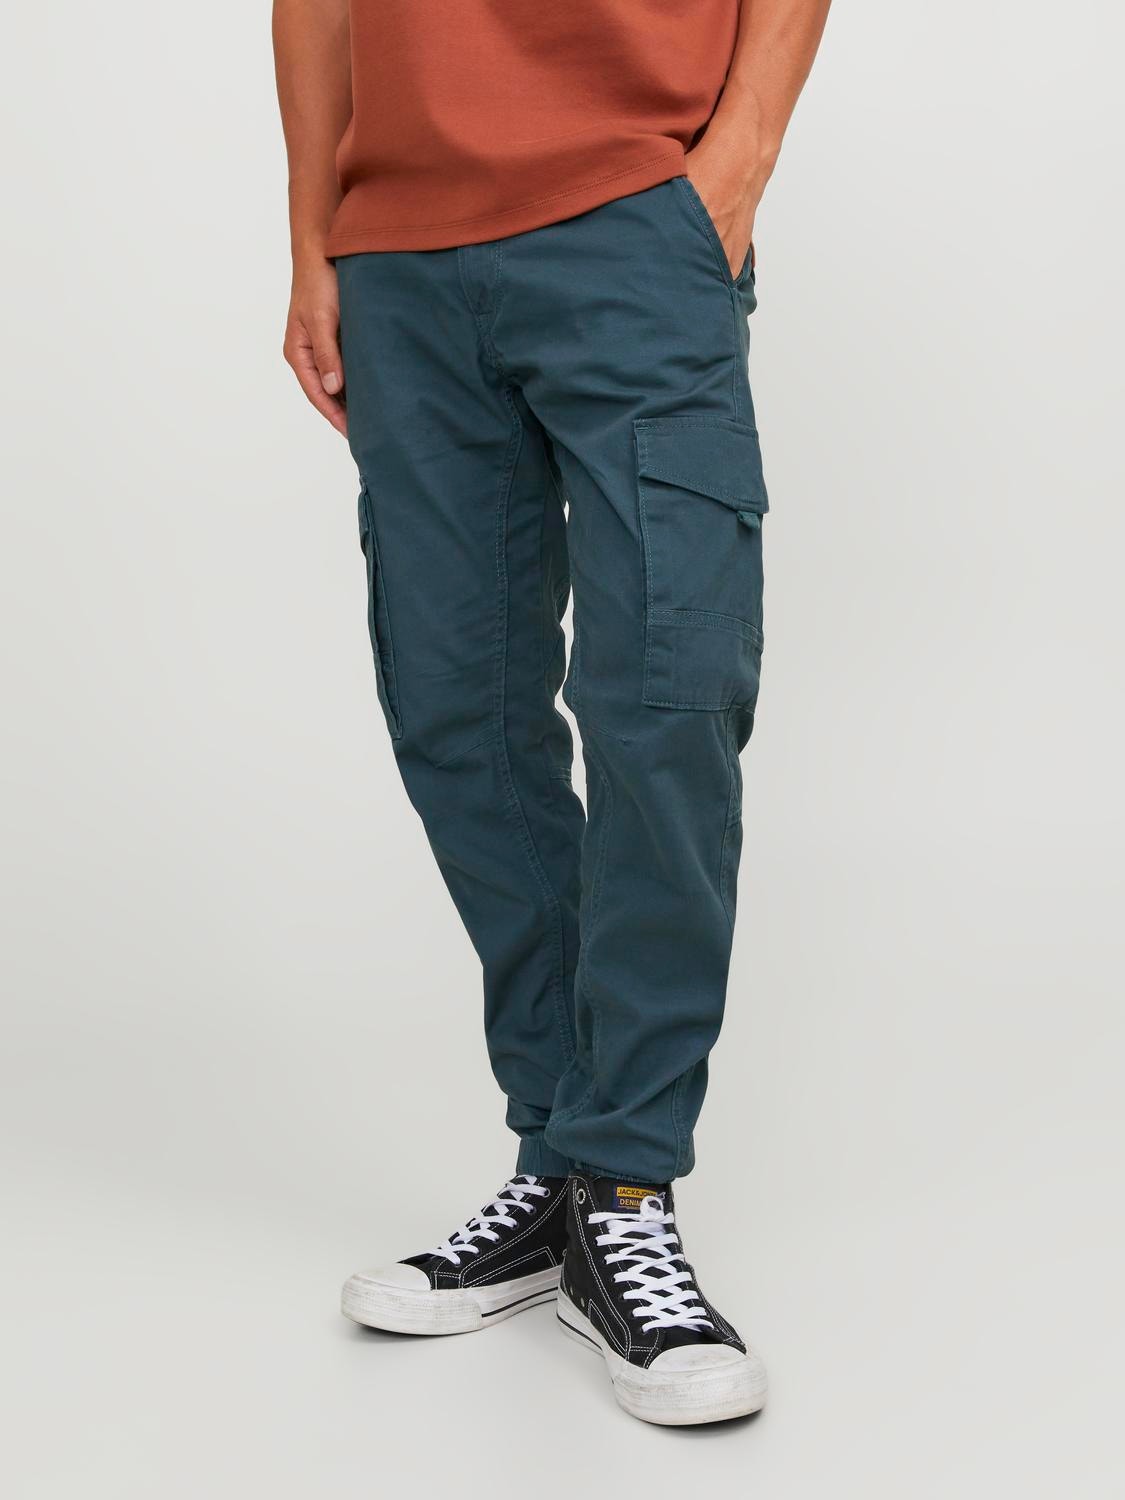 Jack & Jones Slim Fit Cargo trousers -Magical Forest - 12139912